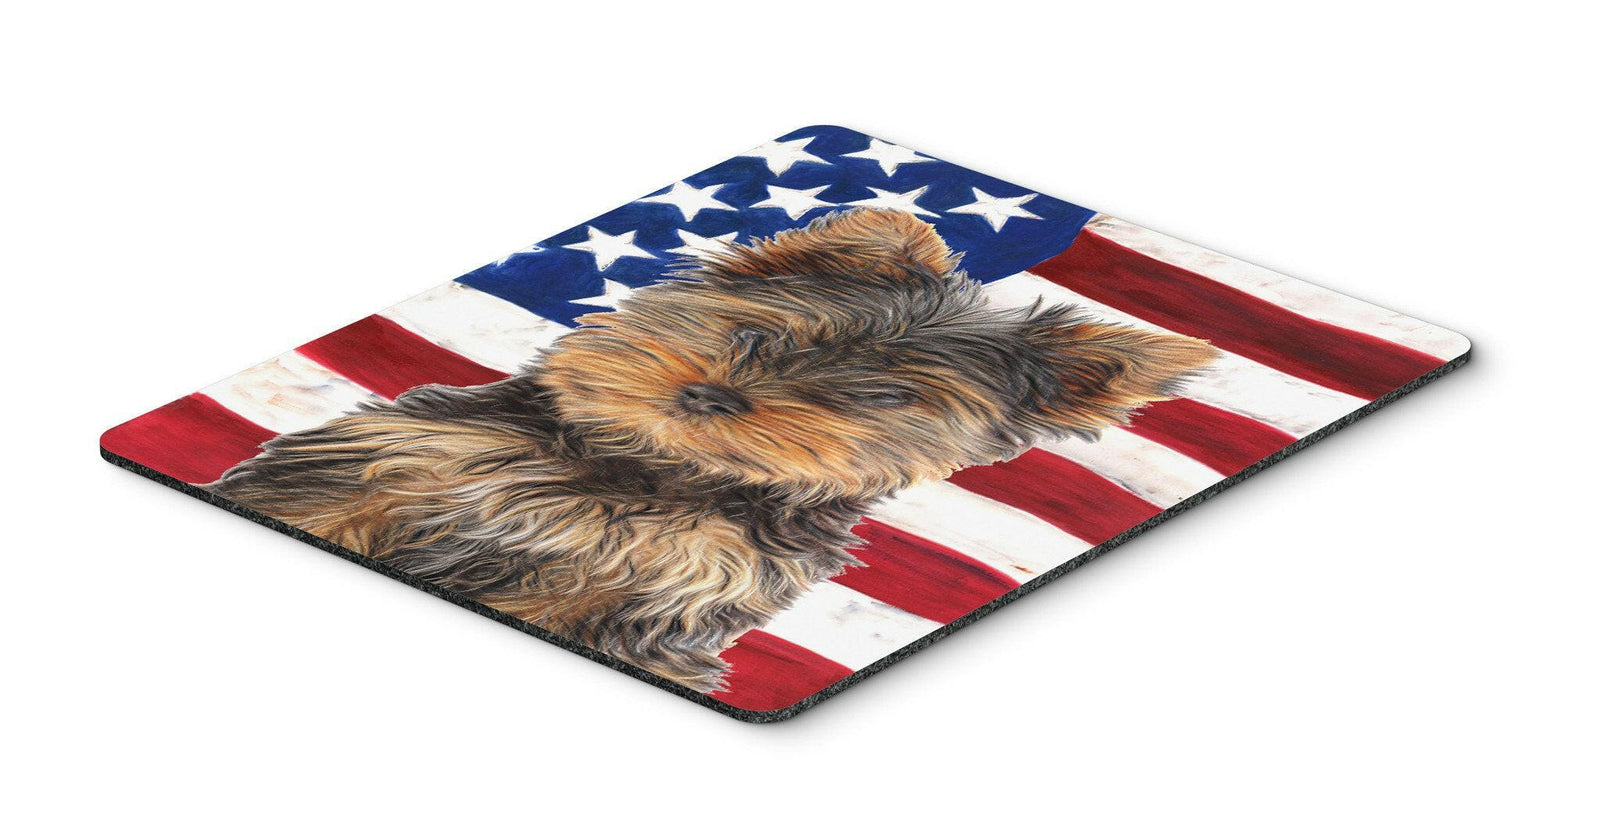 USA American Flag with Yorkie Puppy / Yorkshire Terrier Mouse Pad, Hot Pad or Trivet KJ1160MP by Caroline's Treasures